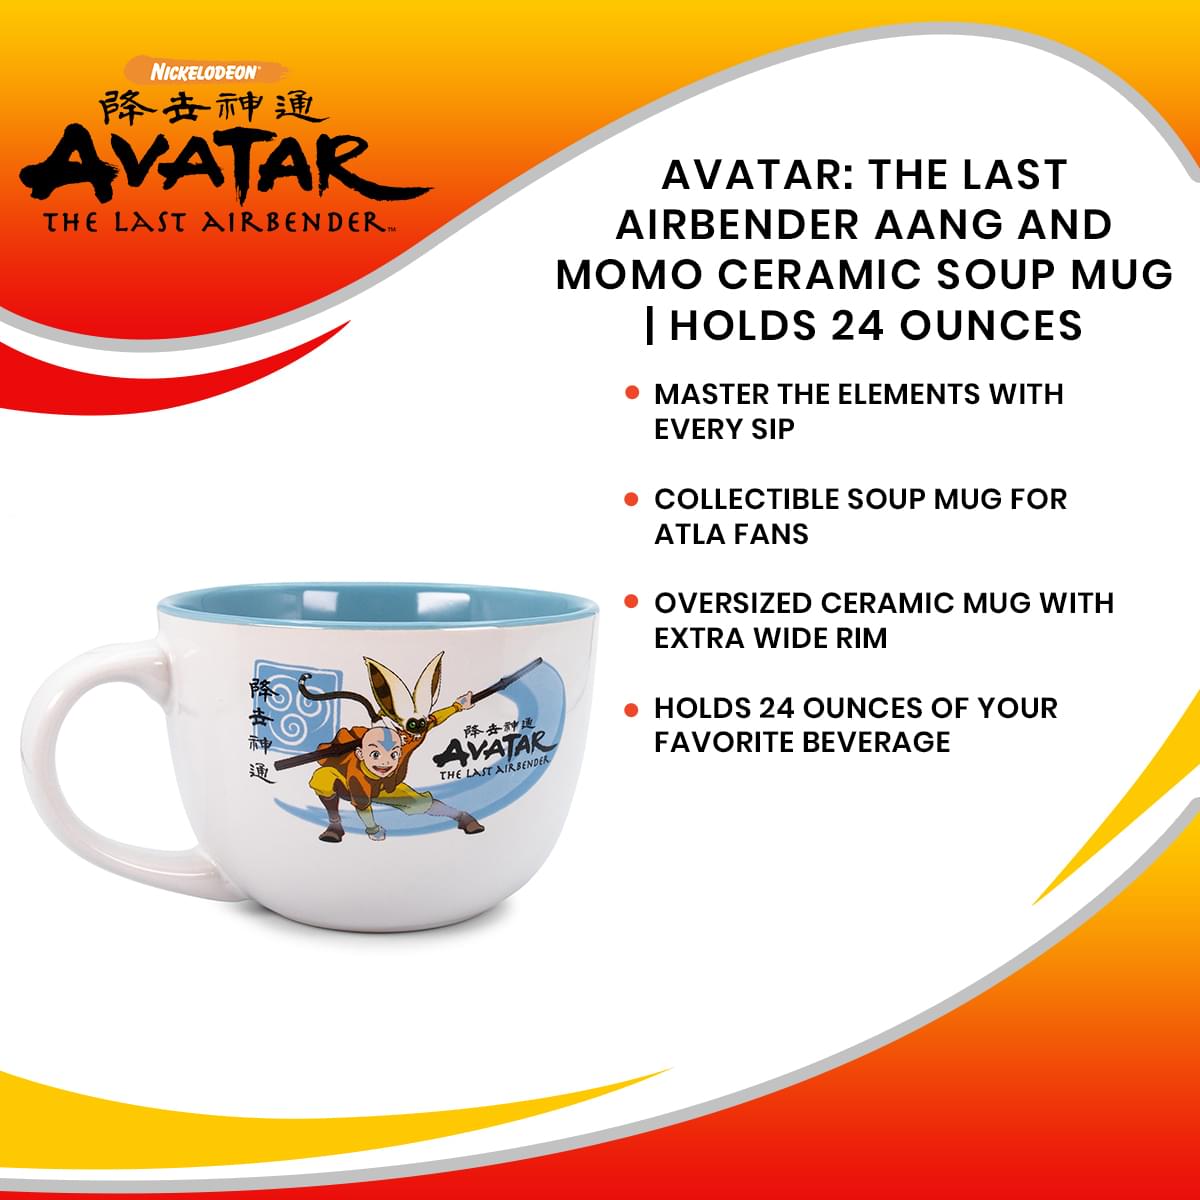 Avatar: The Last Airbender Aang and Momo Ceramic Soup Mug | Holds 24 Ounces